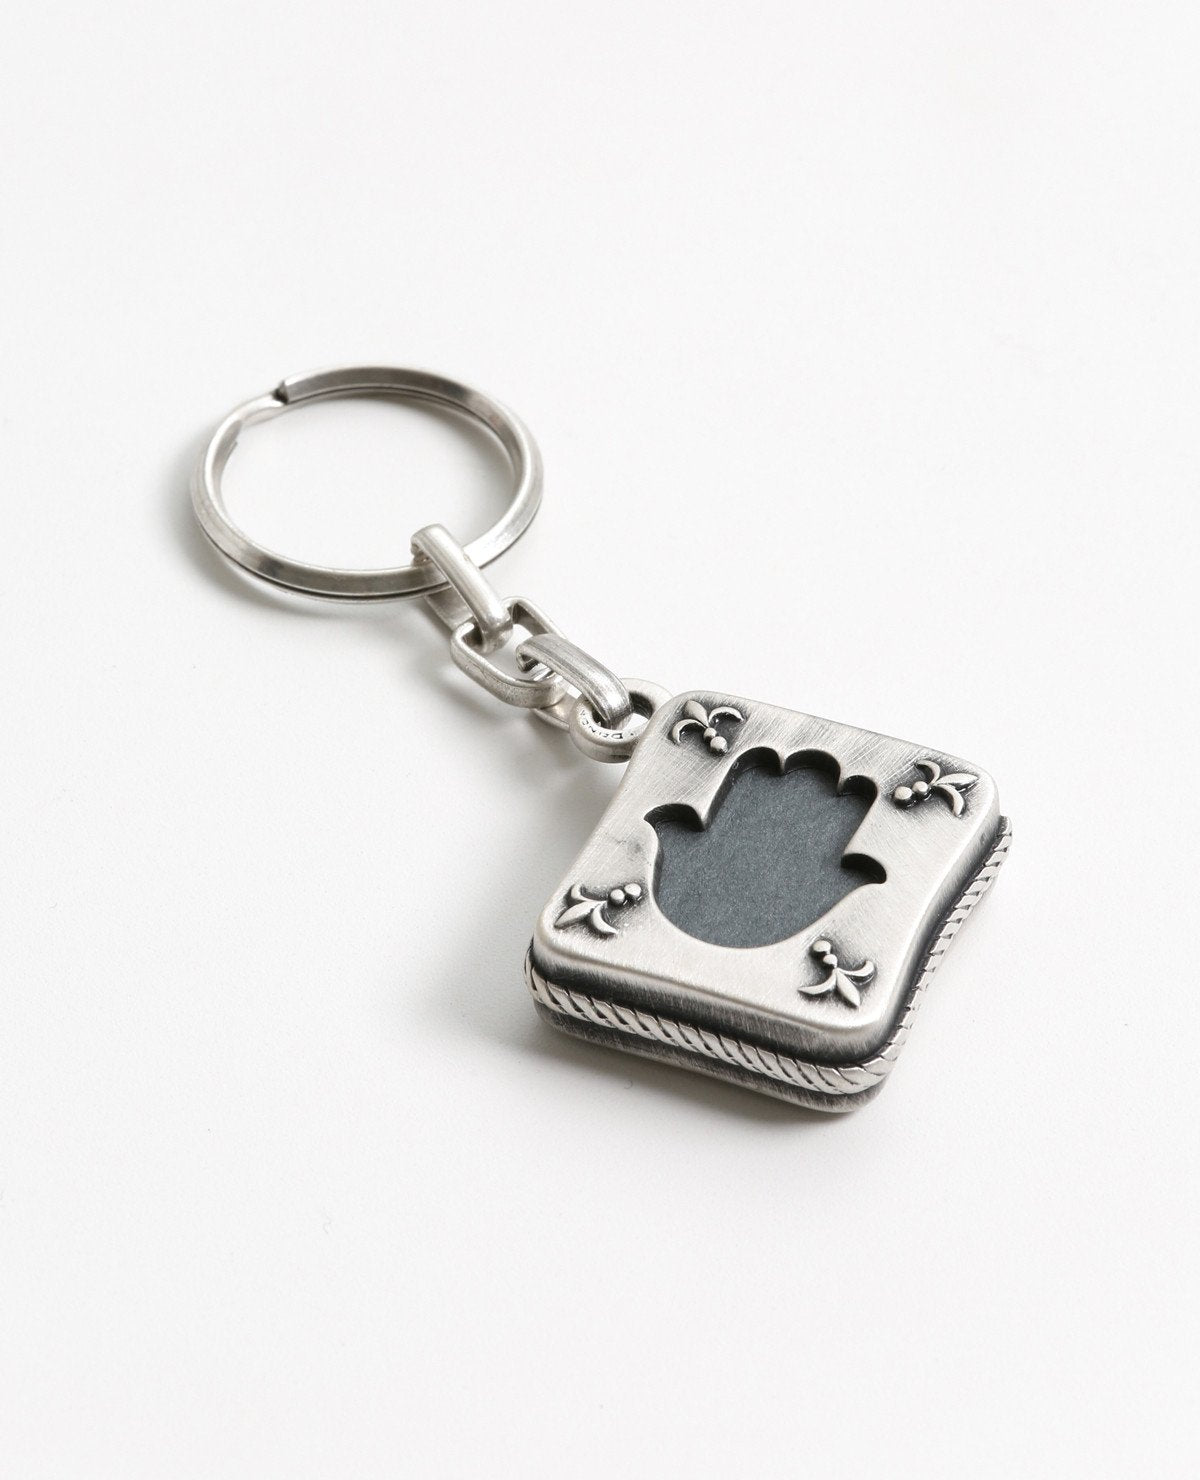 Tehillim is always with you. An exciting and elegantly designed keychain coated in sterling silver. Fashioned in the form of a small silver envelope with the book of Tehillim inside. The outline is designed on both sides as a frame with a hollow Hamsa shape in the middle, through which we can see the book on both its front and back sides. Feel safe and connected to your roots any time you have this wonderful keychain on you. You will feel even better when you grant it with love to the dearest people in your